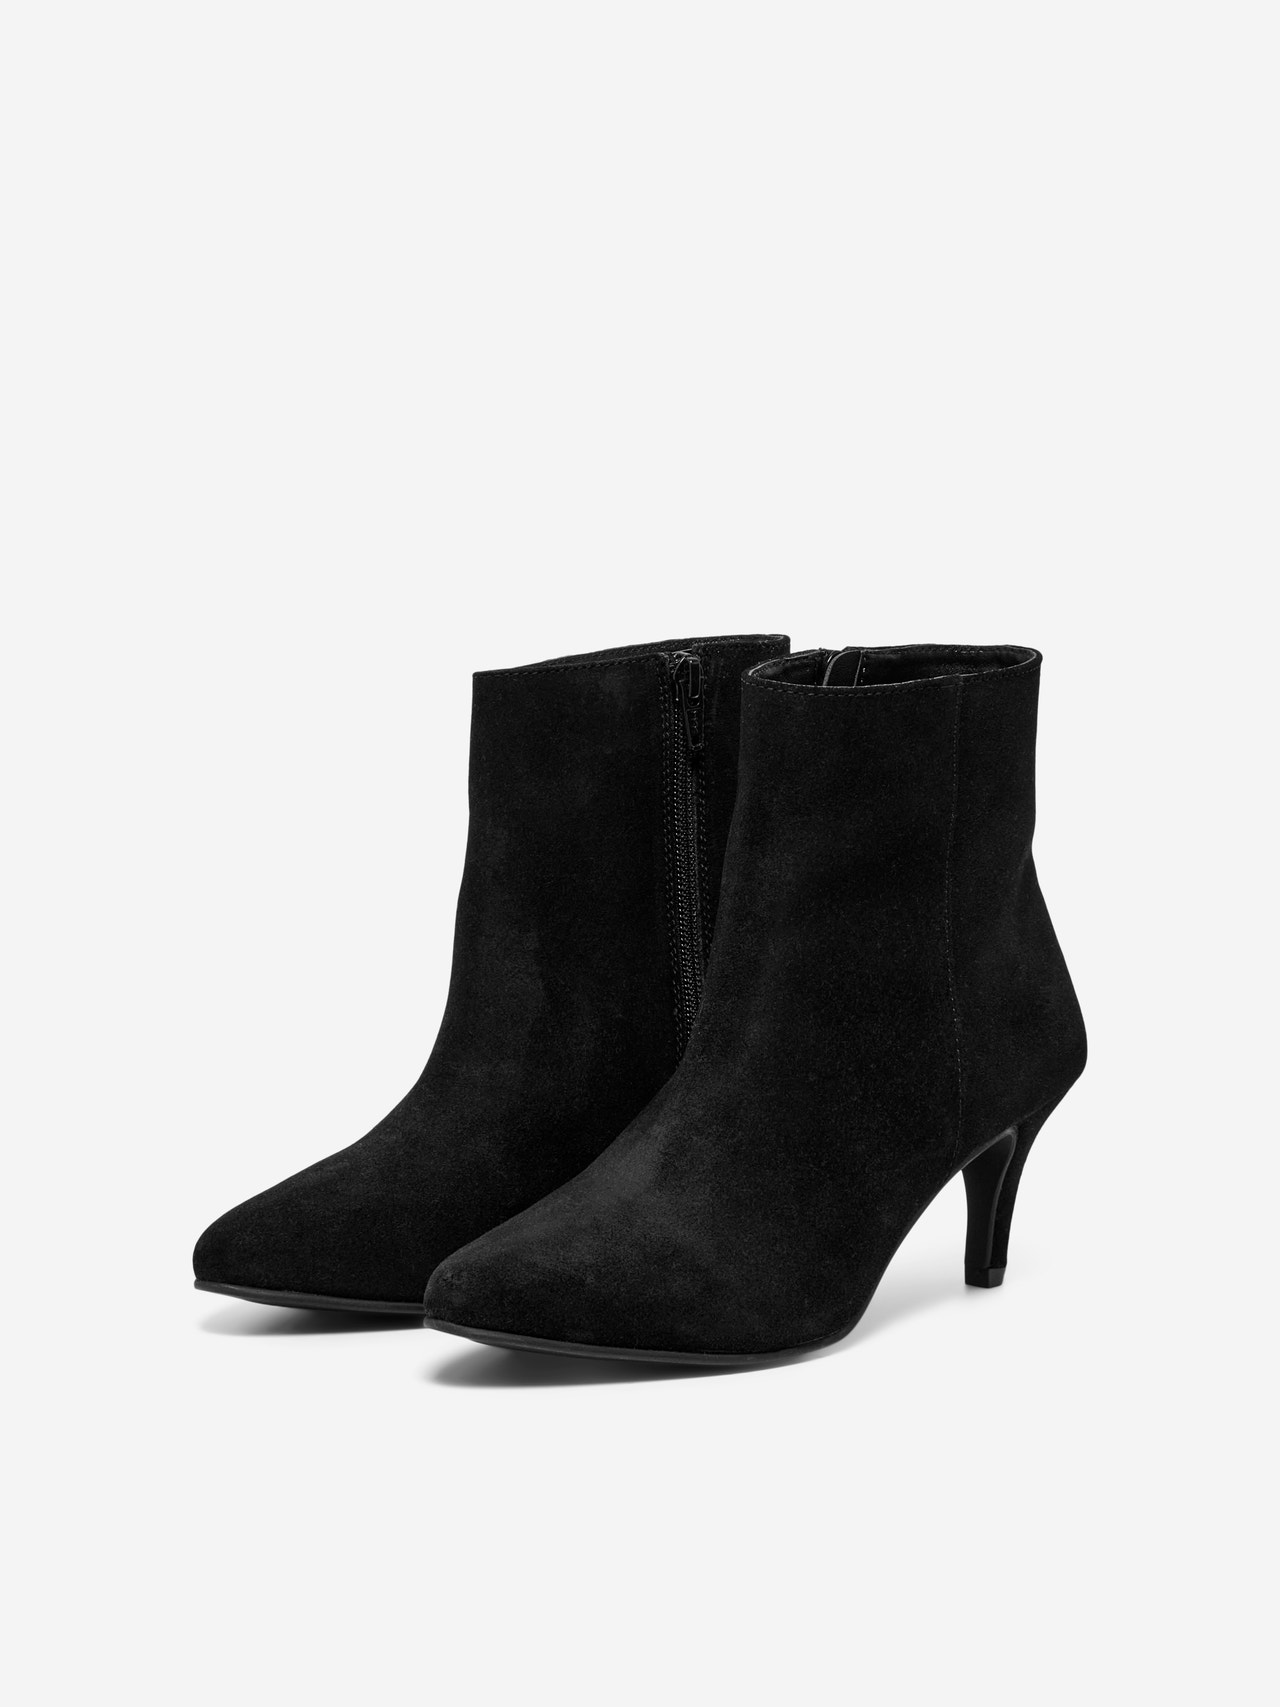 ONLY Suede Boots -Black - 15287515